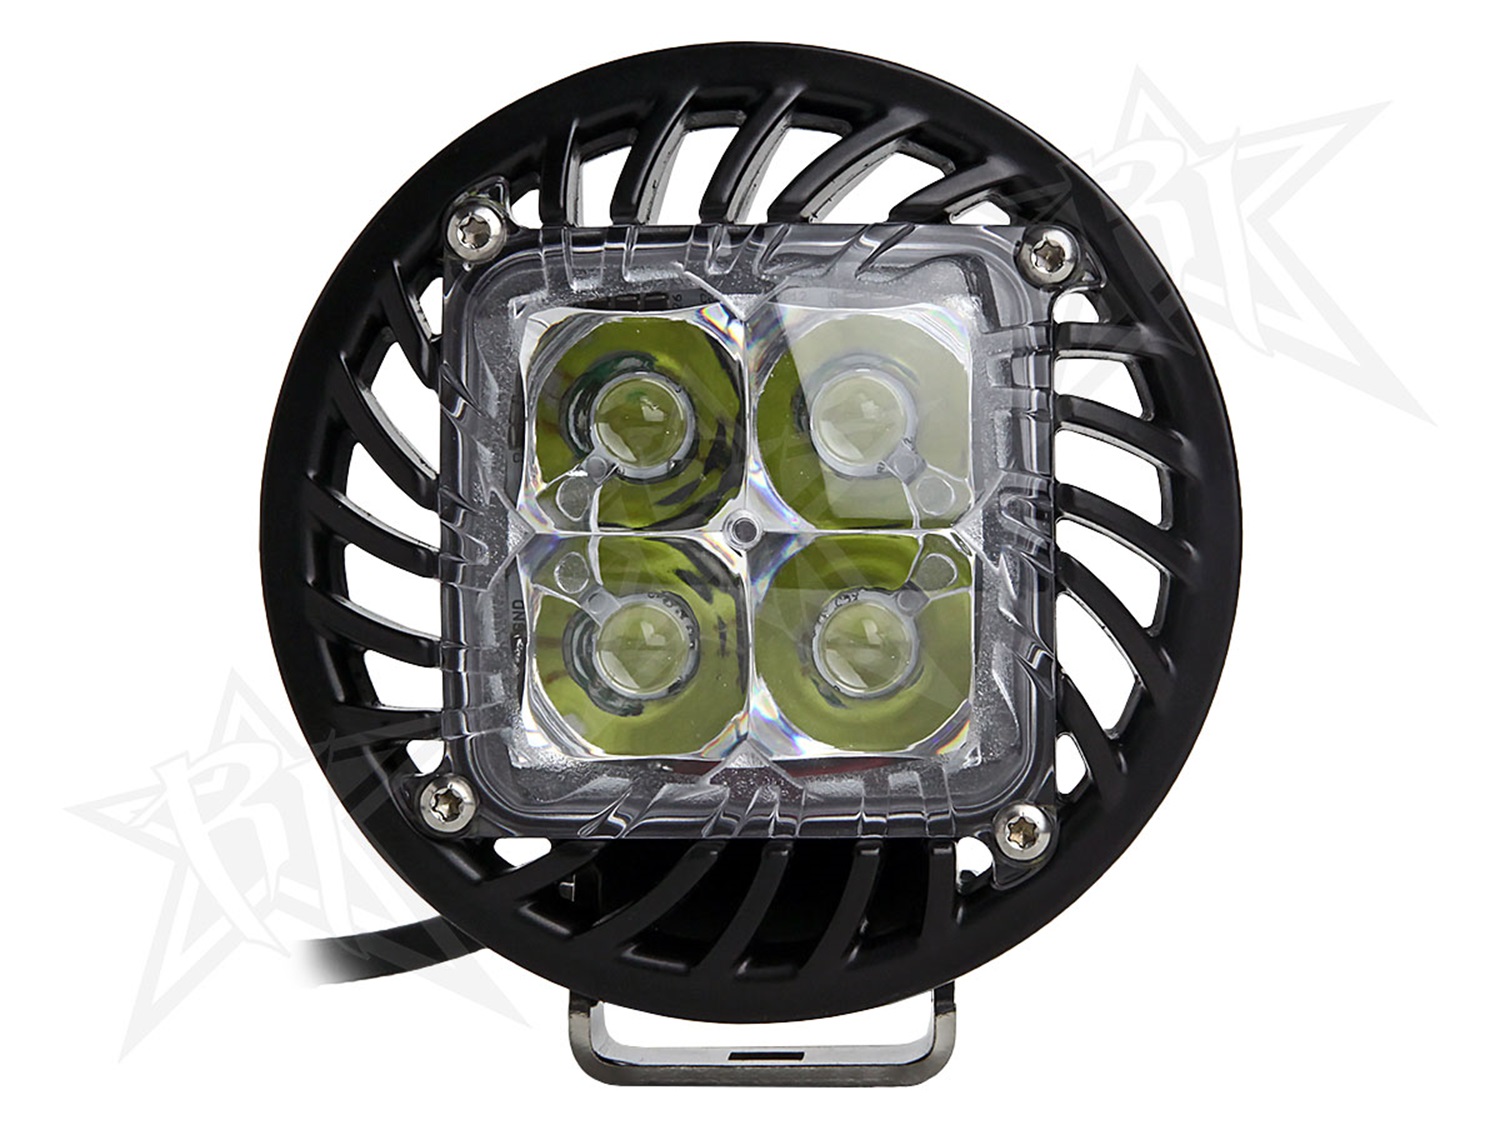 Show details for Rigid Industries 62010 Rigid Industries Expands Its Circular Light Offering With The All-New R-Series 36 Retrofit Which Has All Of The Superior Output And Technology Rigid Is Known For. This Adaptive Crossover Sets Itself Apart From The Rest With Its Curved Lens, Curved Housing